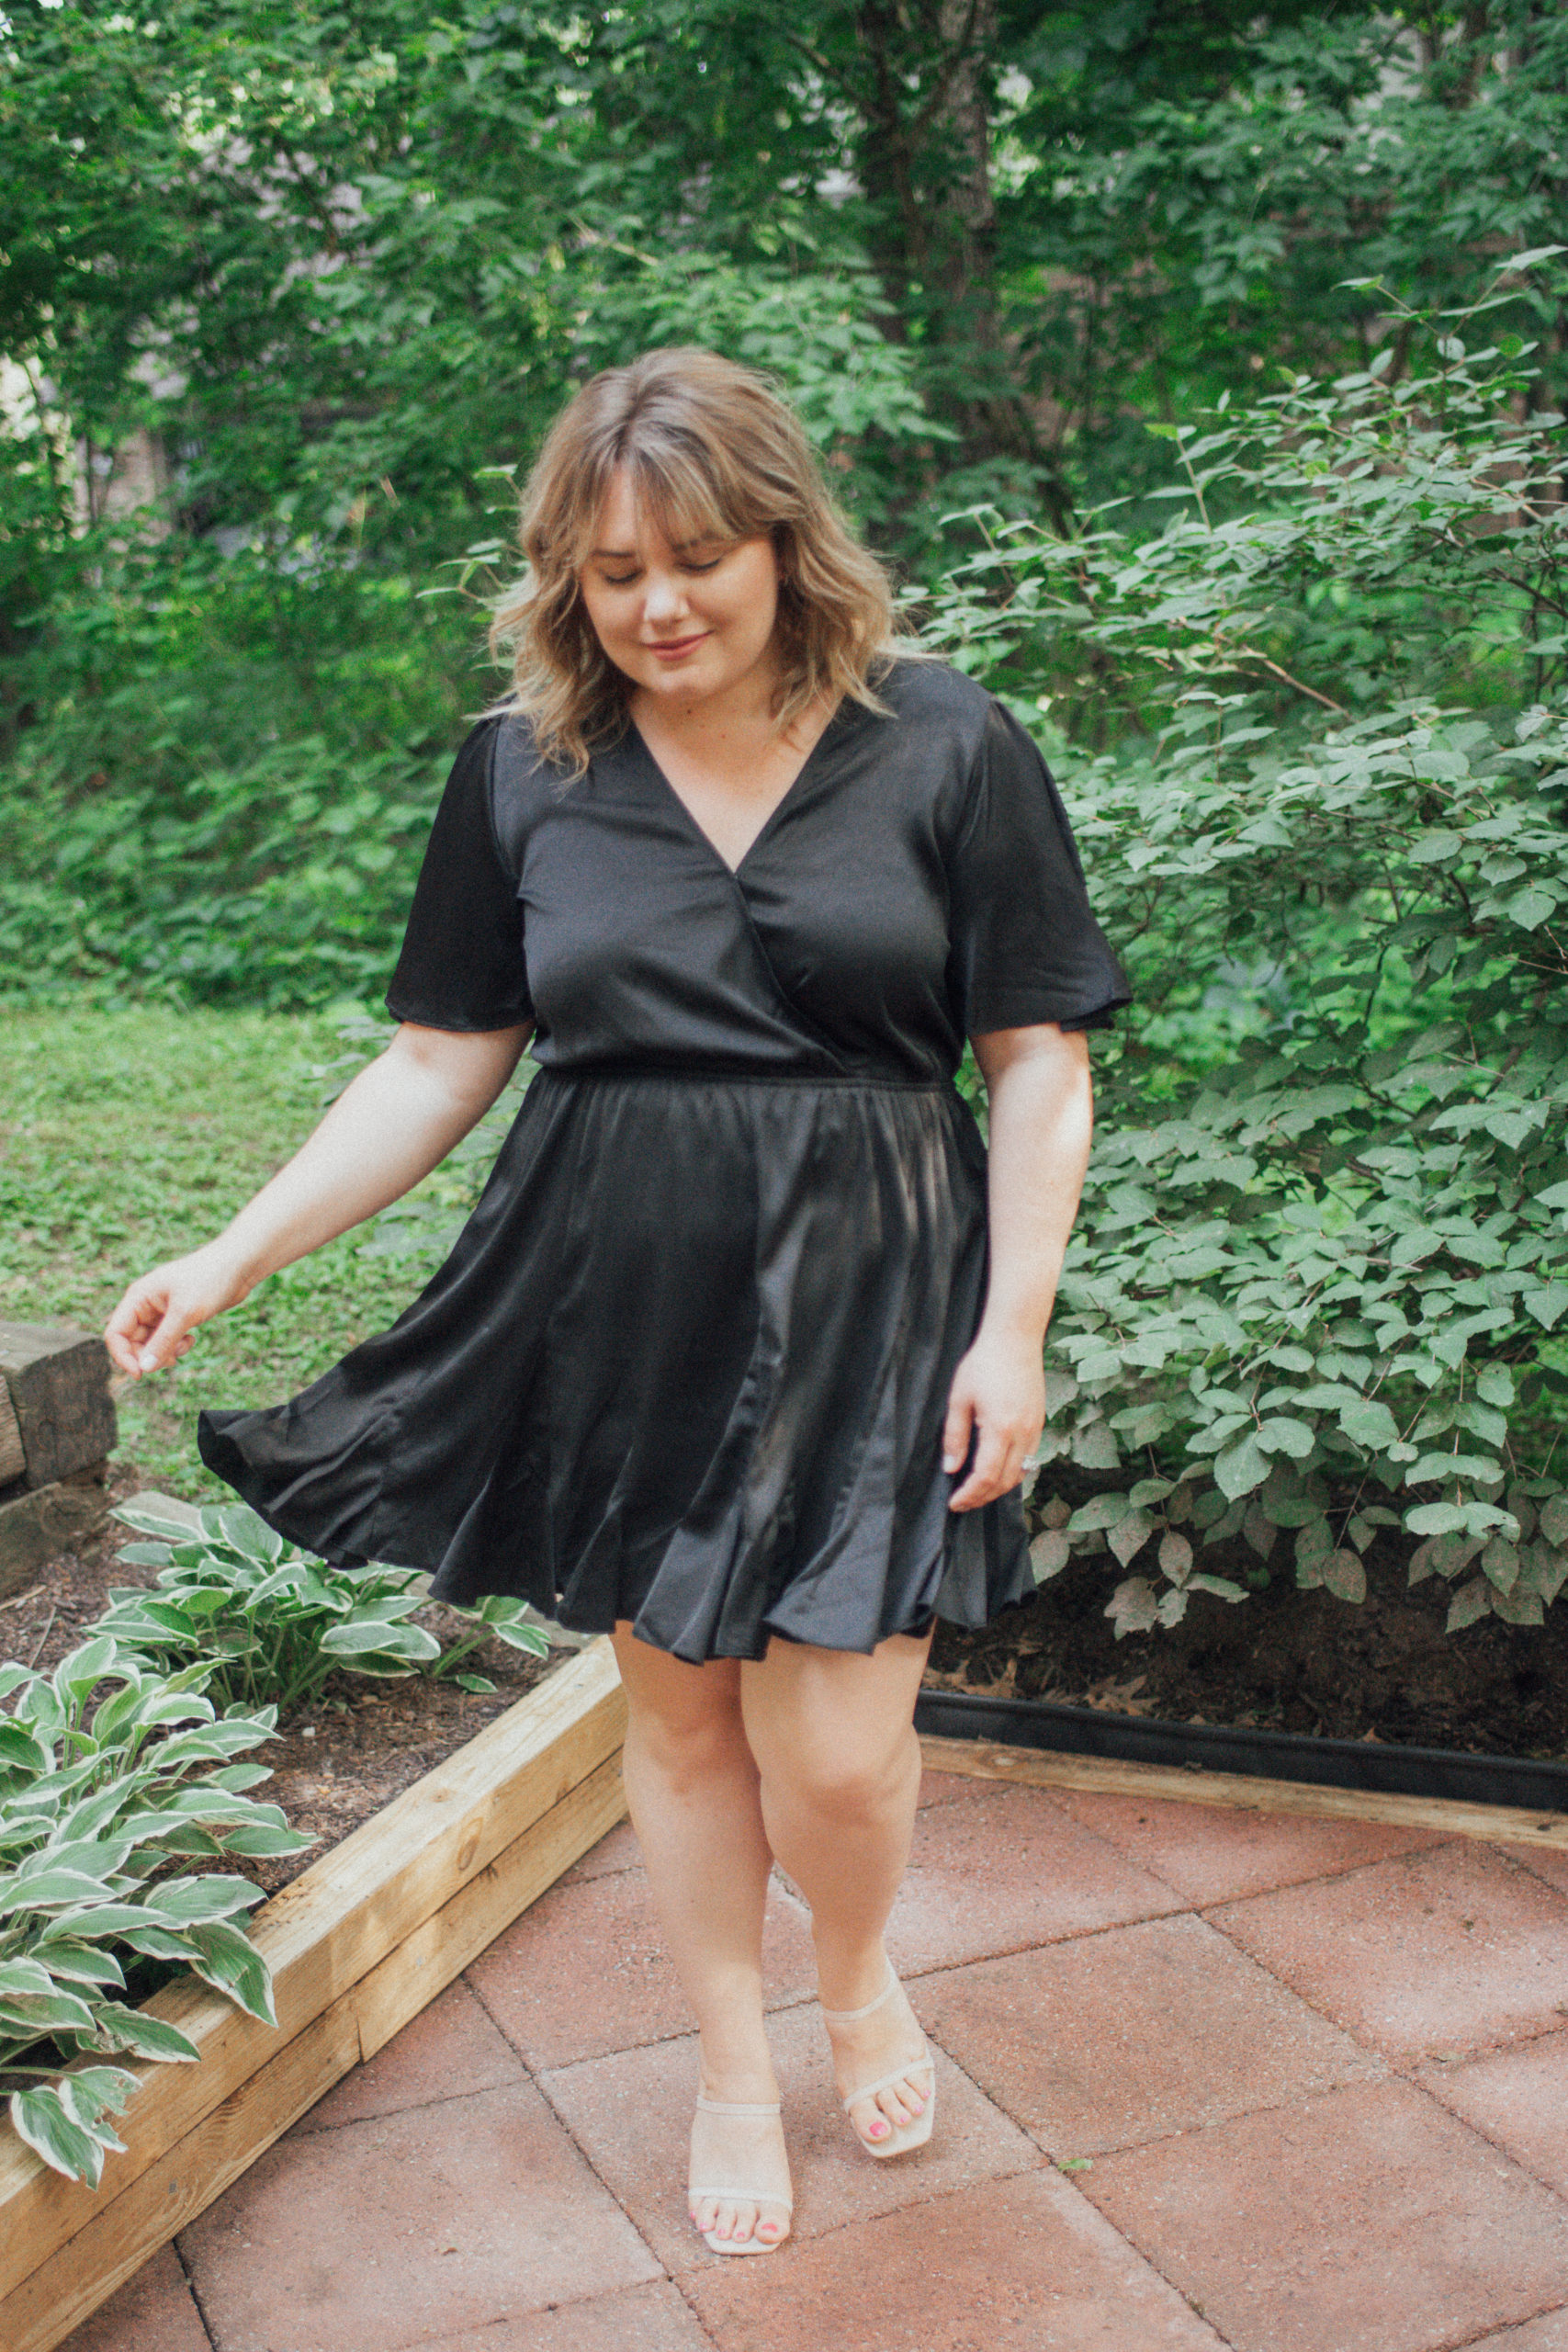 Date Night Dress Ideas featuring the Little Black Dress From Chic Soul. Having a LBD in your closet is like having a secret weapon. 